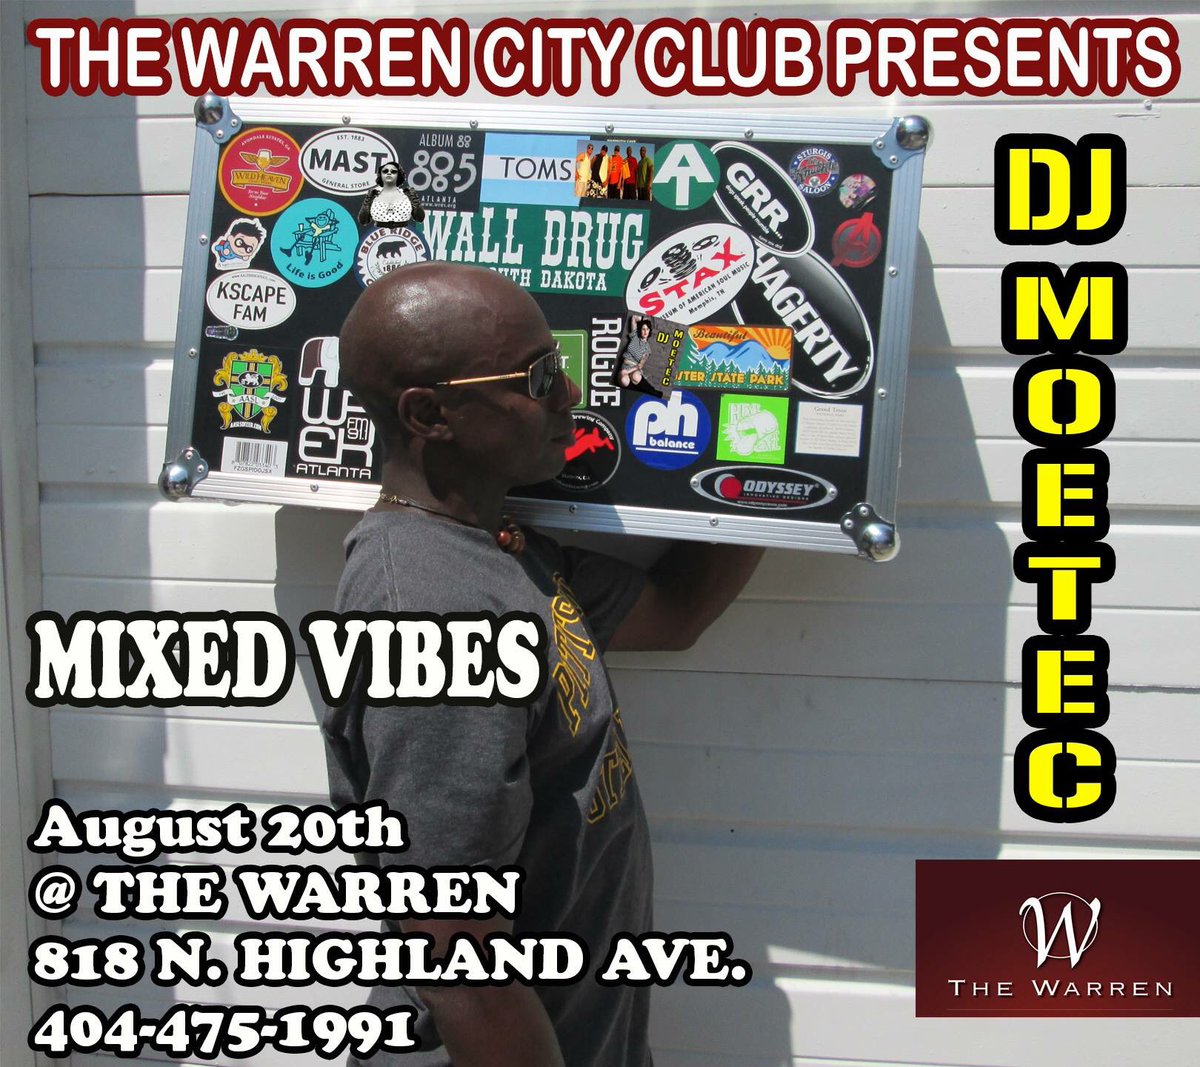 Mixed Vibes Night! I will be there, will you? #thewarren #djmoetec #atldjs #unofficialdjofsteelernation #Smyrna